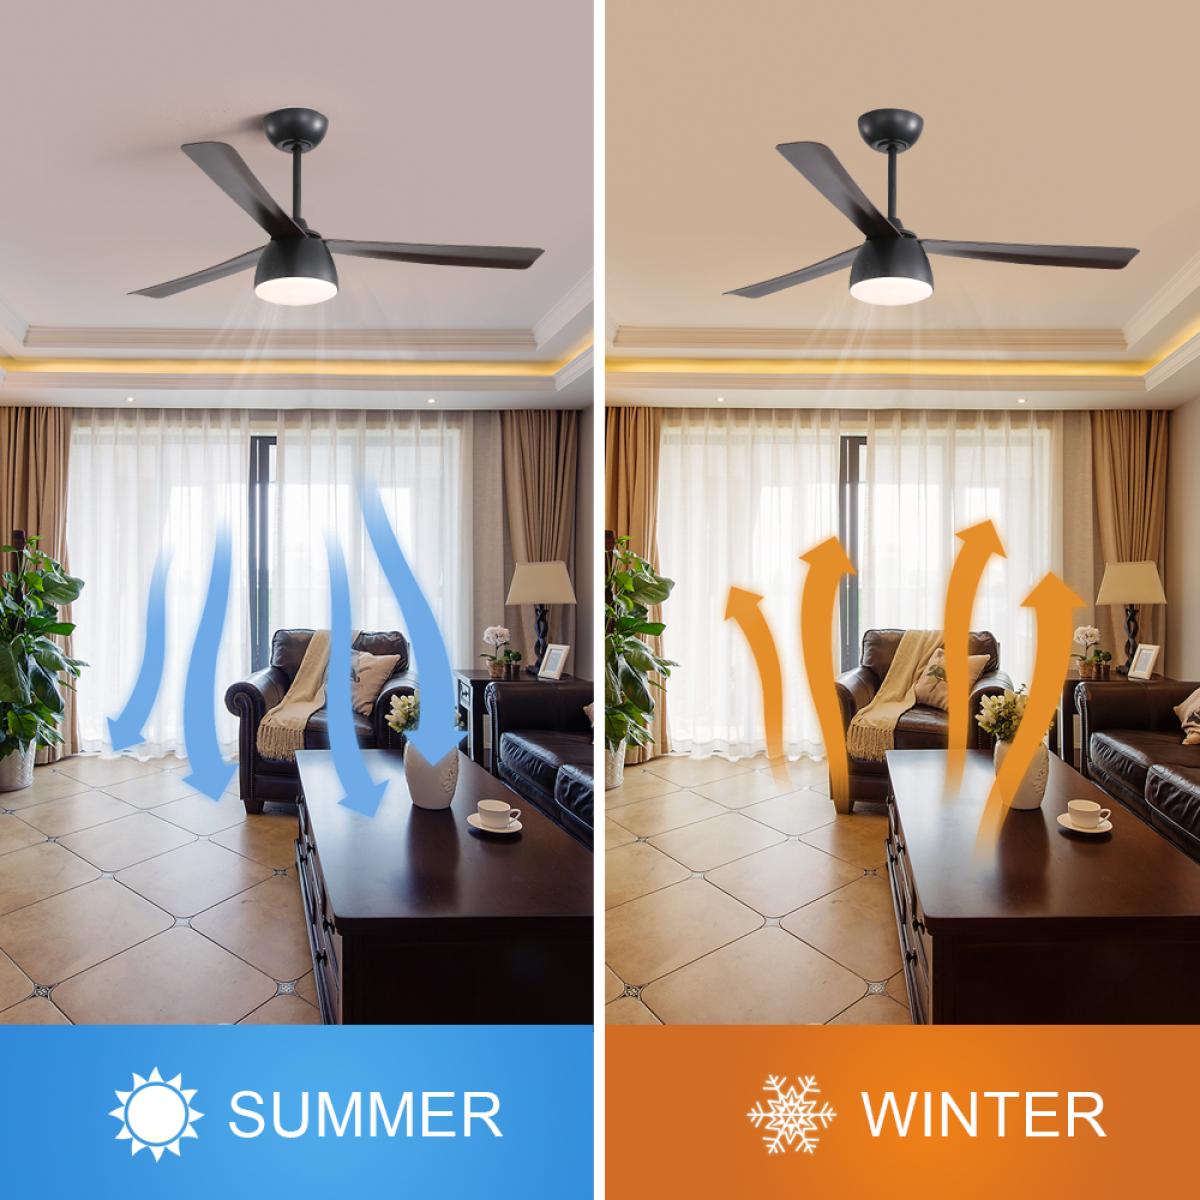 52 Inch Indoor Led Ceiling Fan With 3 Color Dimmable 6 Speed Remote Control 3 Blade For Living Room